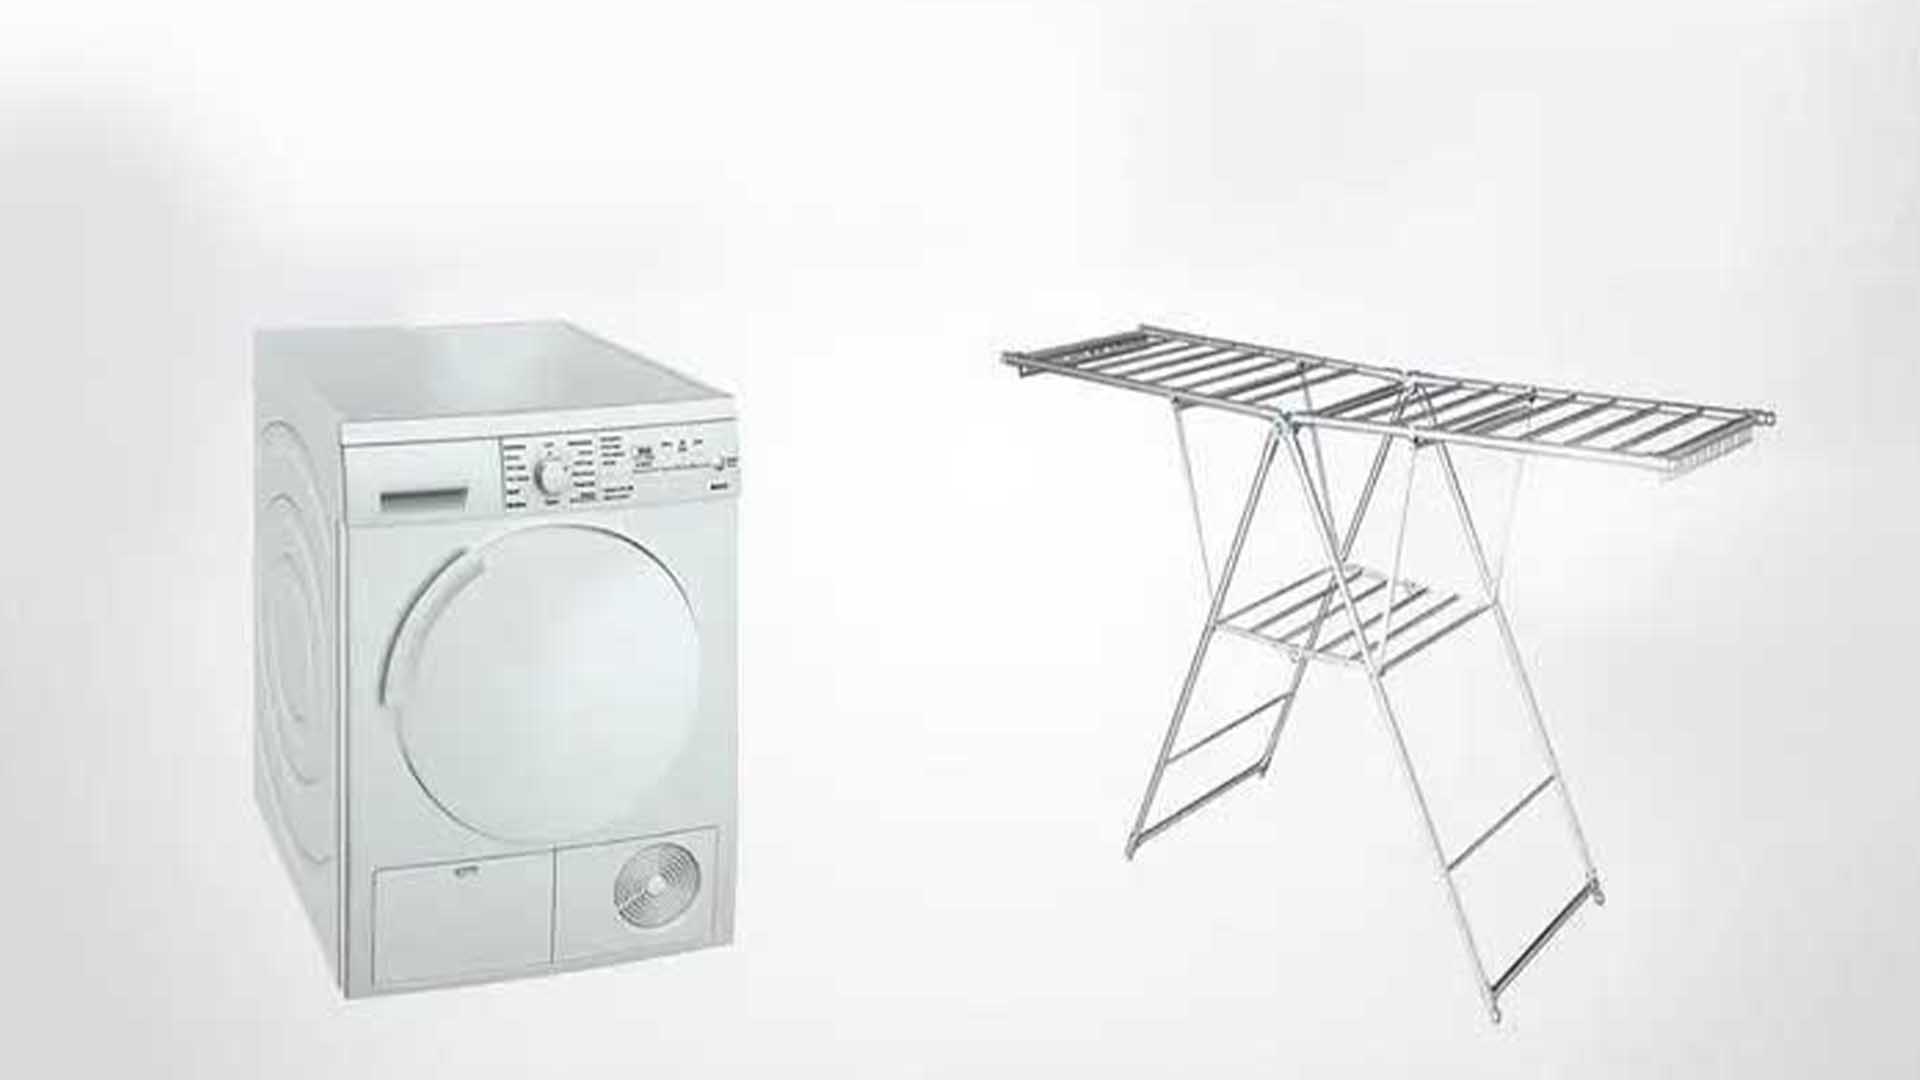 The Future Evolution of Clothes Dryers: Stereo-Curing 3D Printers Enable Innovative 3D Printed Clothes Dryer Prototypes